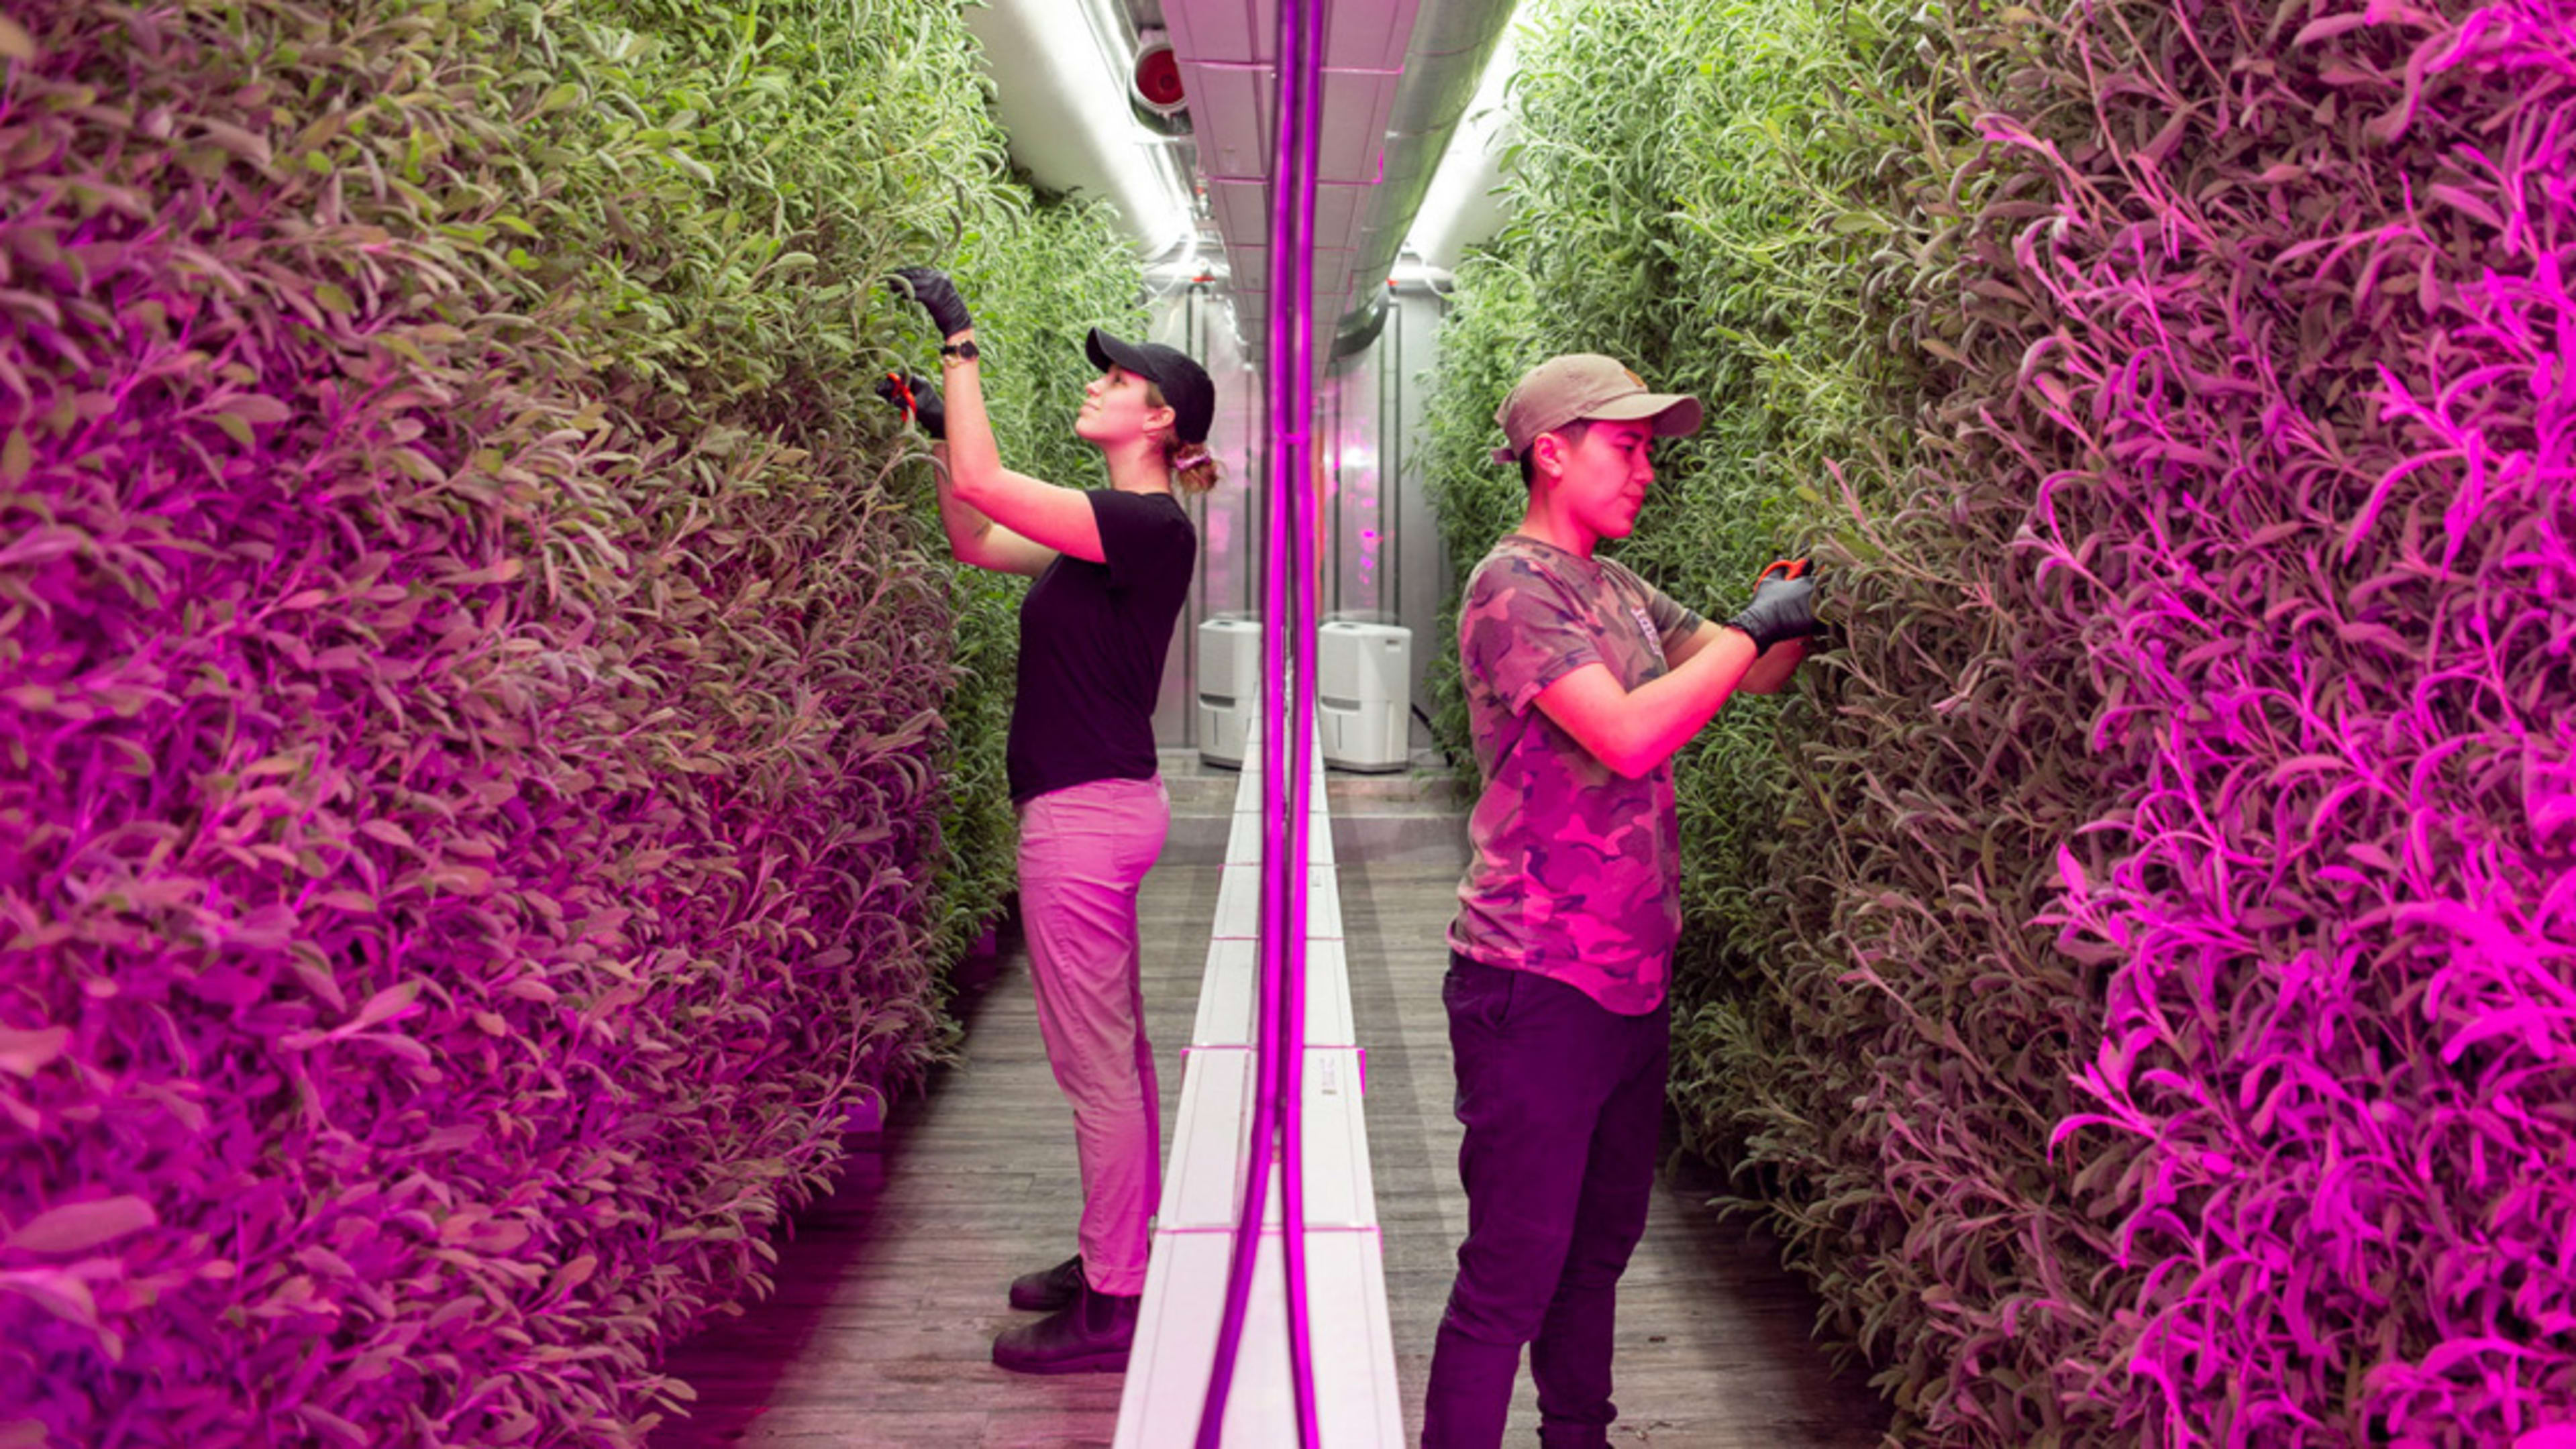 These shipping container farms will soon be in grocery store lots across the U.S.